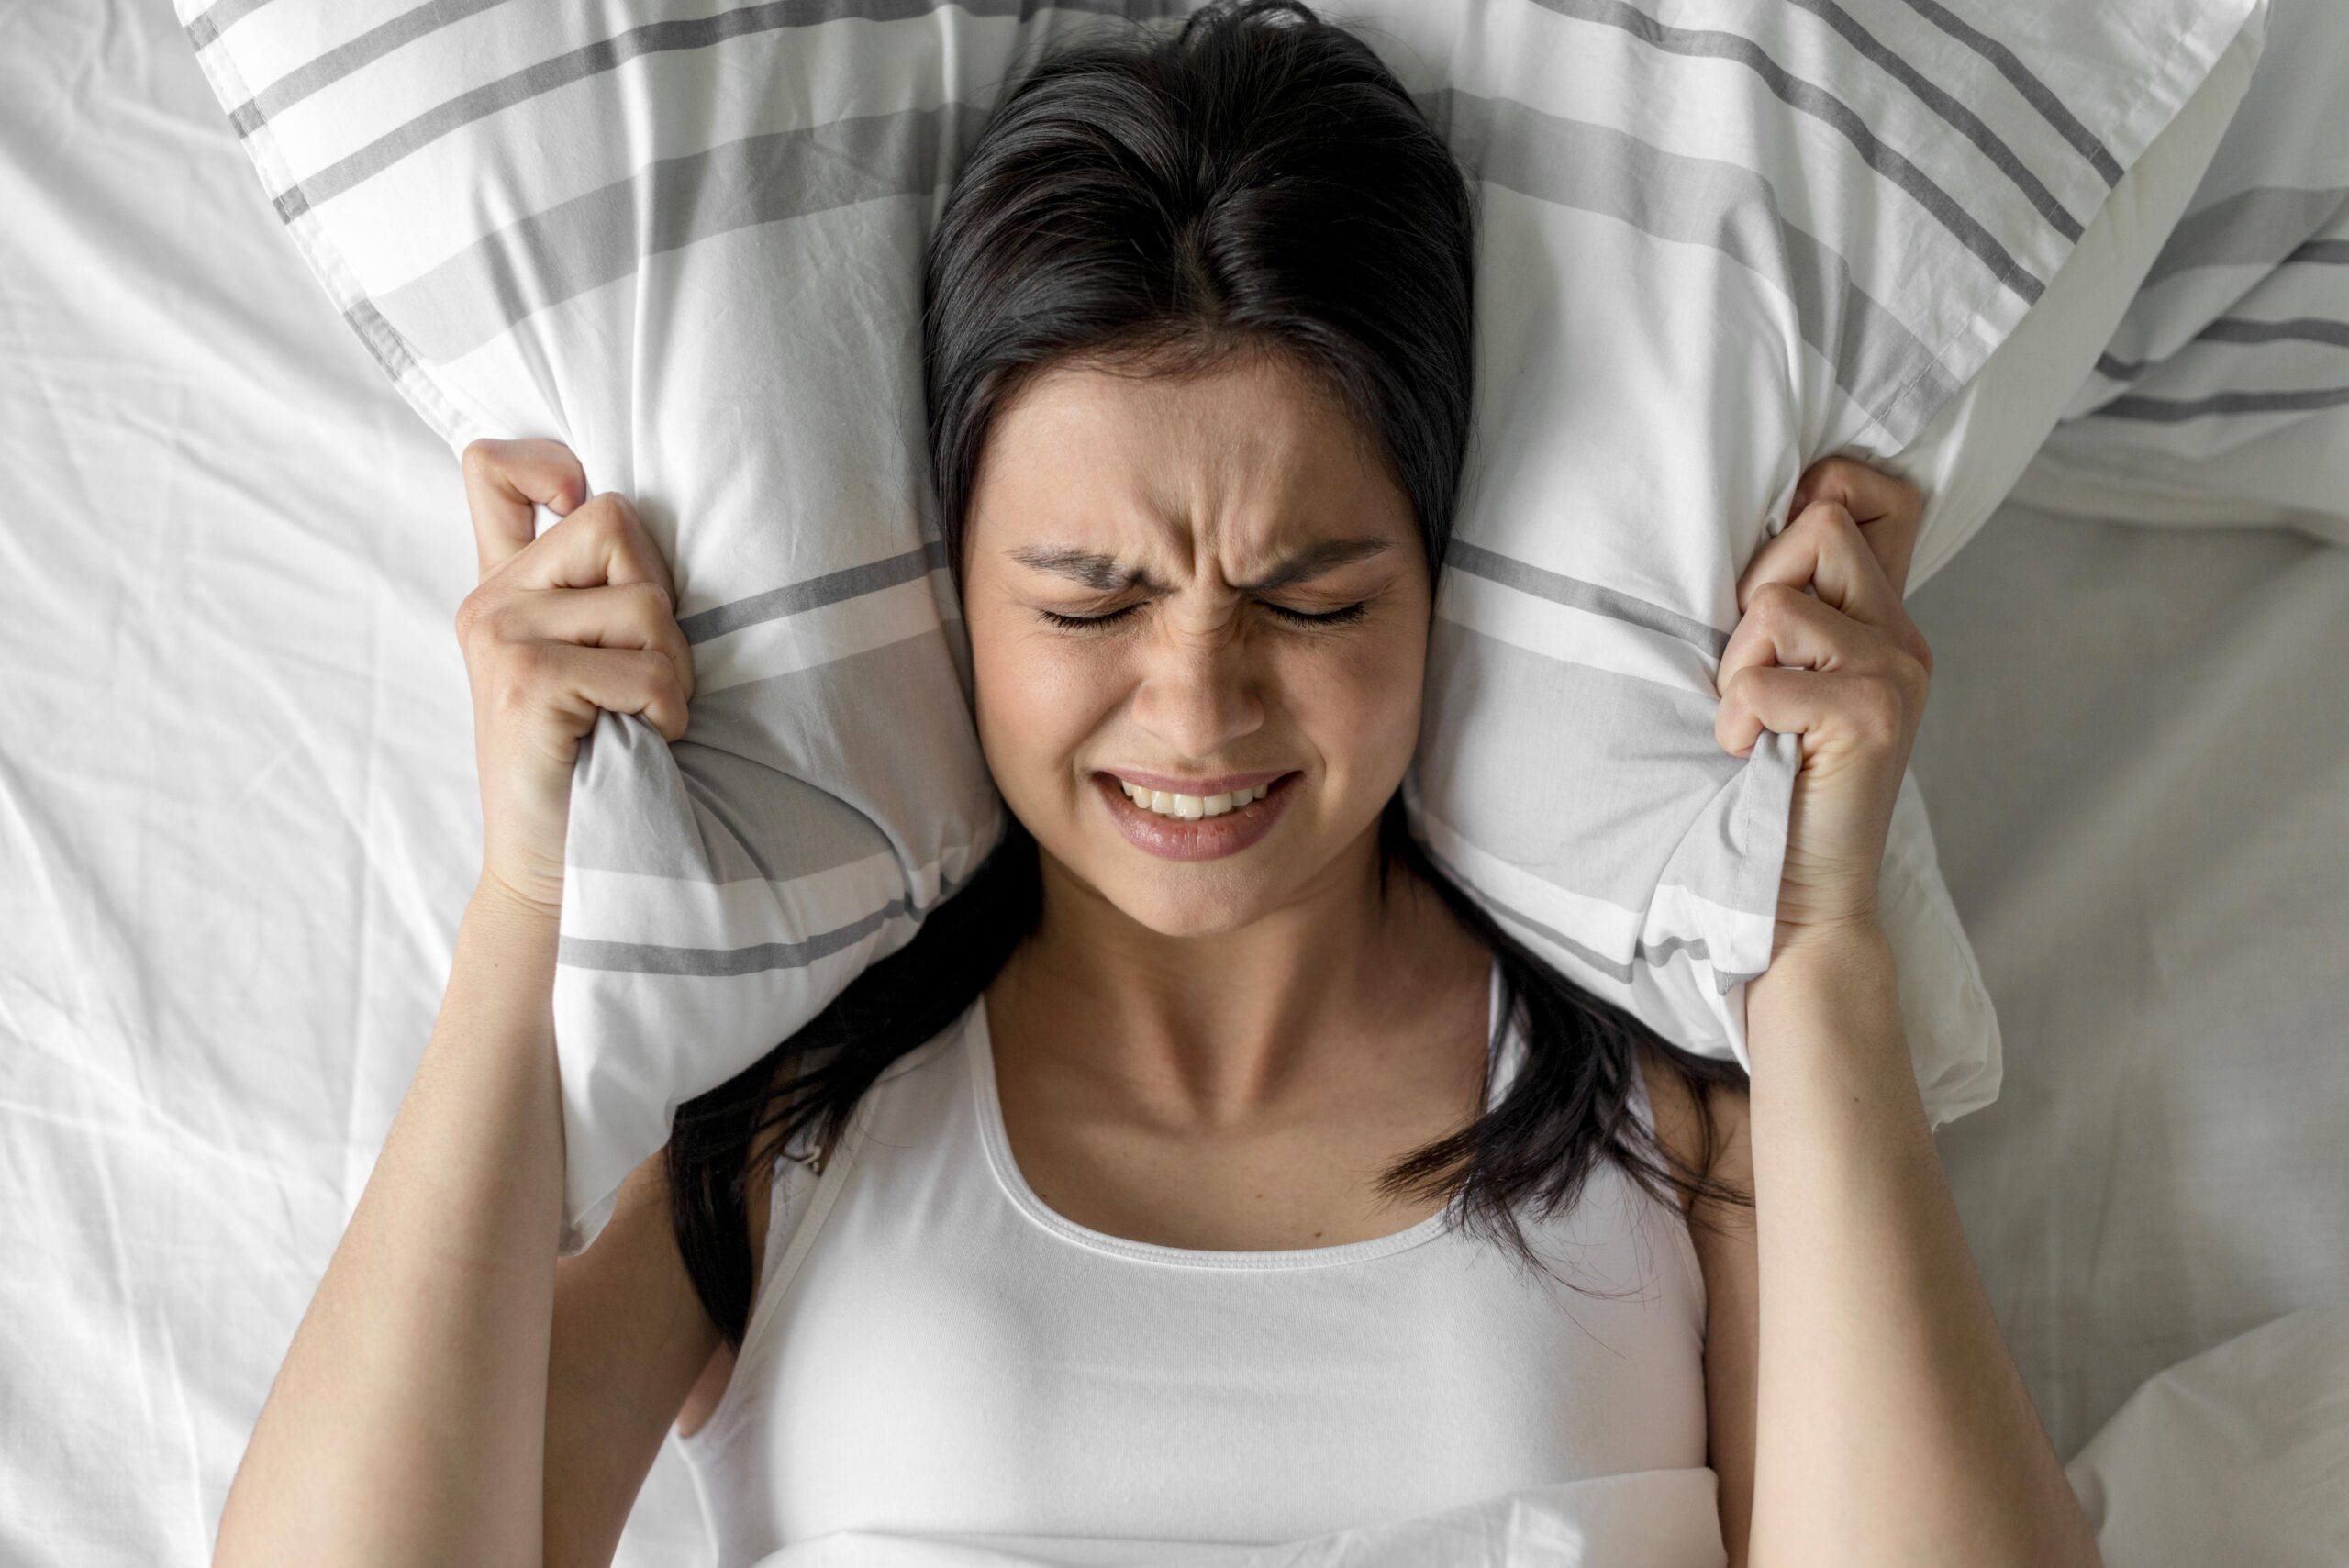 Young woman in frustration holding pillow during an epizode of Hangziety